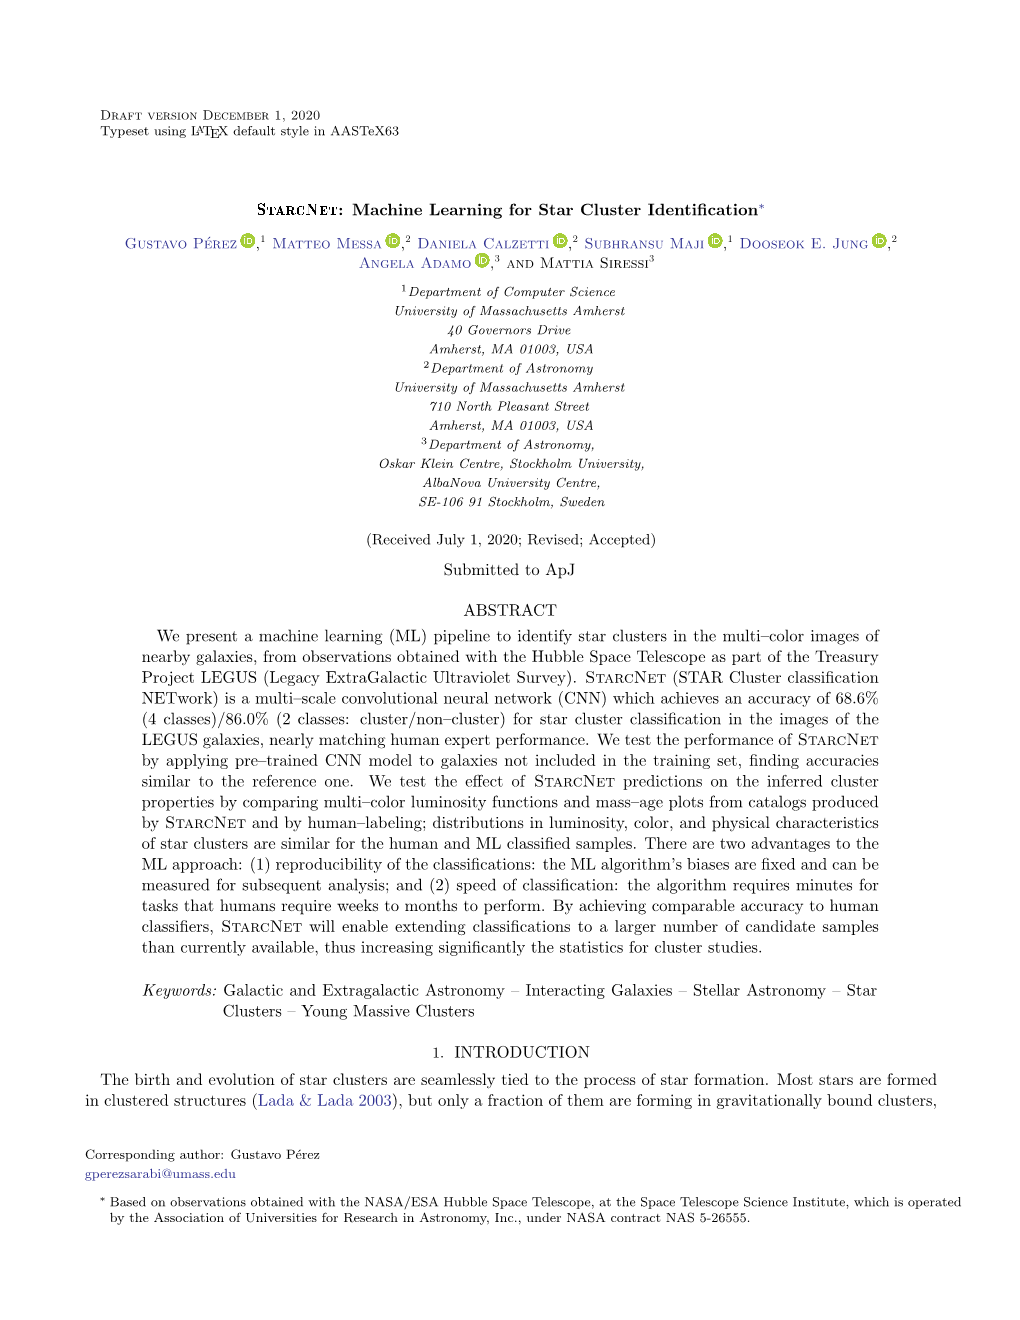 Machine Learning for Star Cluster Identification∗ Submitted to Apj